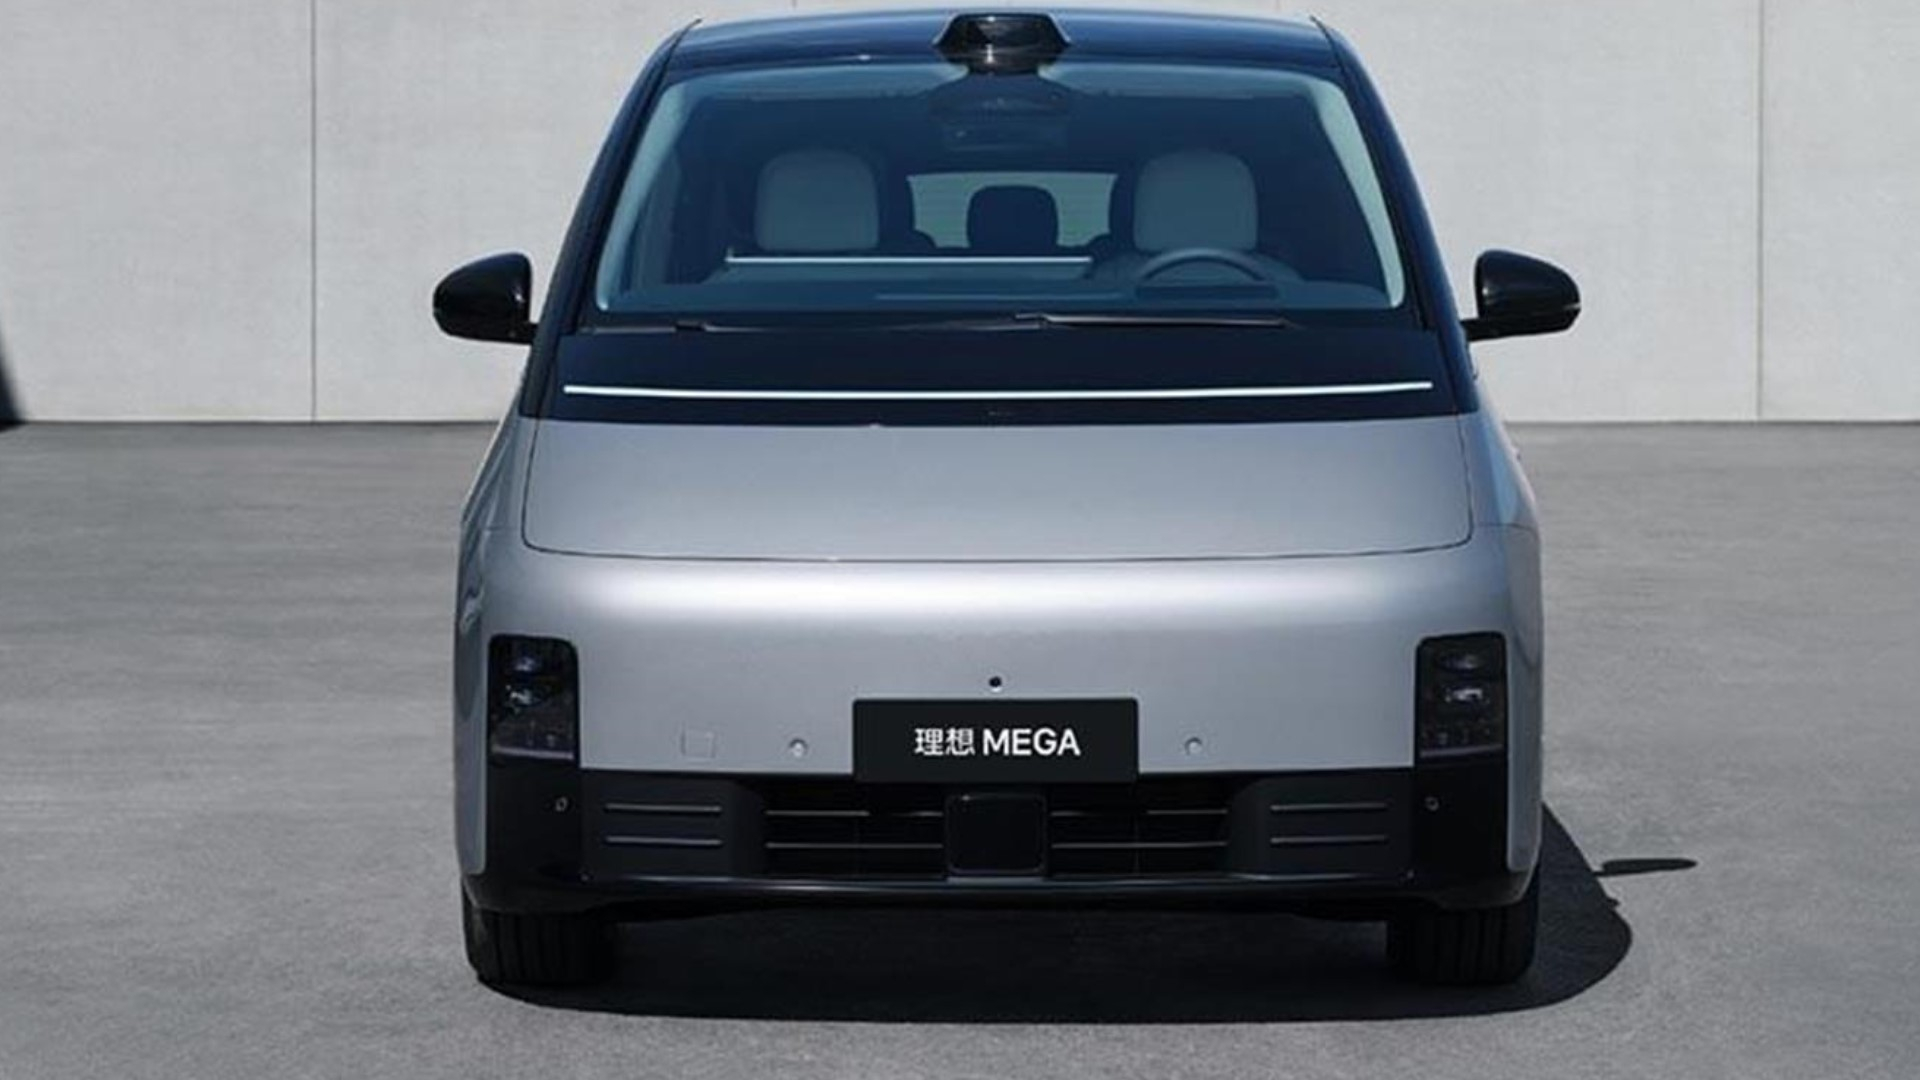 Car That Goes 500 km with 12 Minutes of Charging: Li Auto Mega